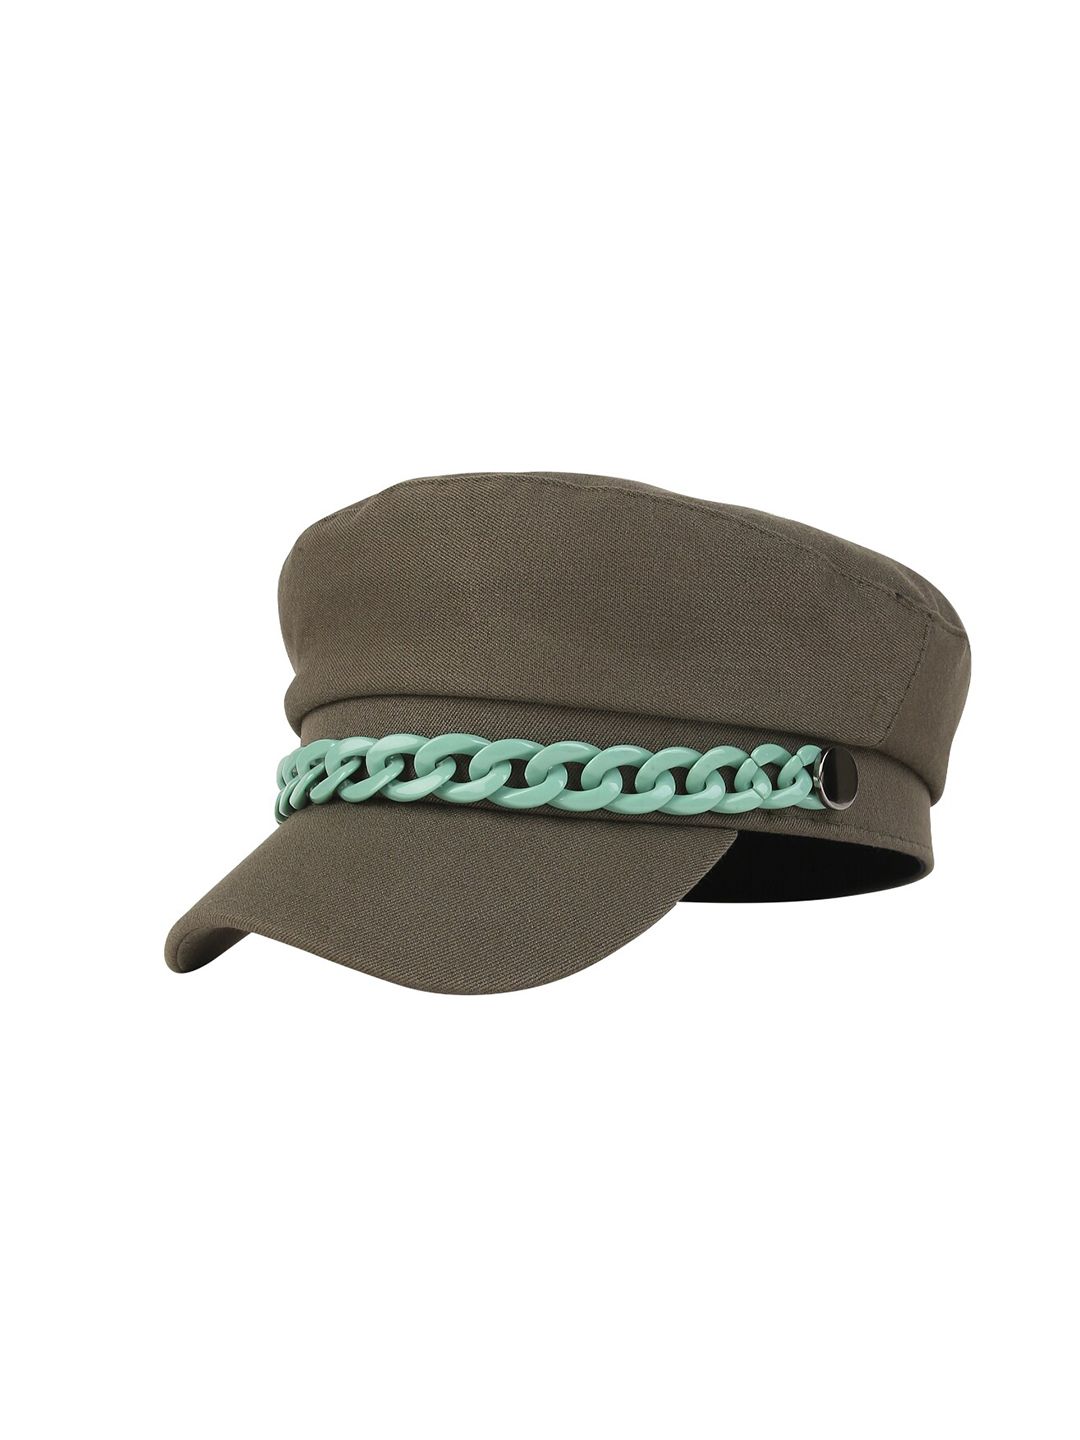 iSWEVEN Unisex Olive Green Solid Cotton Ascot Cap Price in India